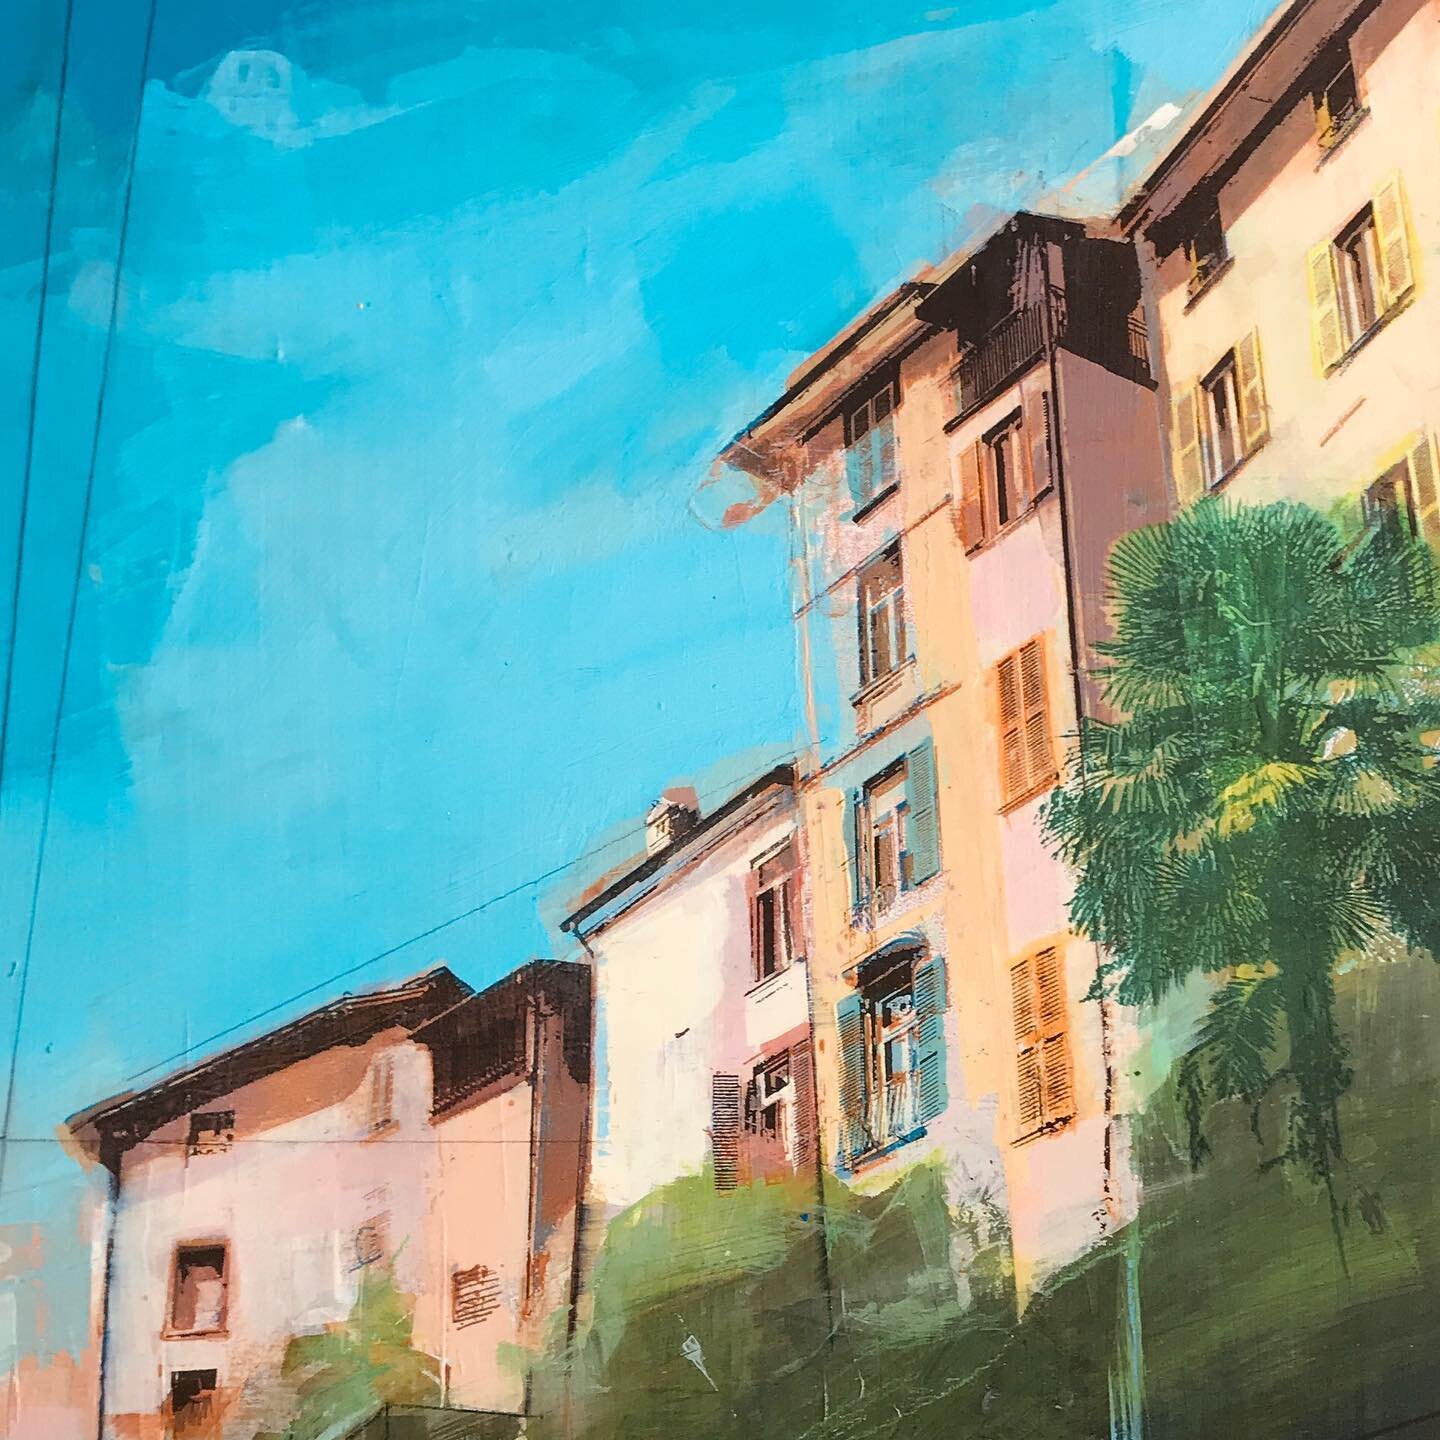 Bergamo, a hidden gem in northern Italy, #painting #print #cityscapes #colour #italy